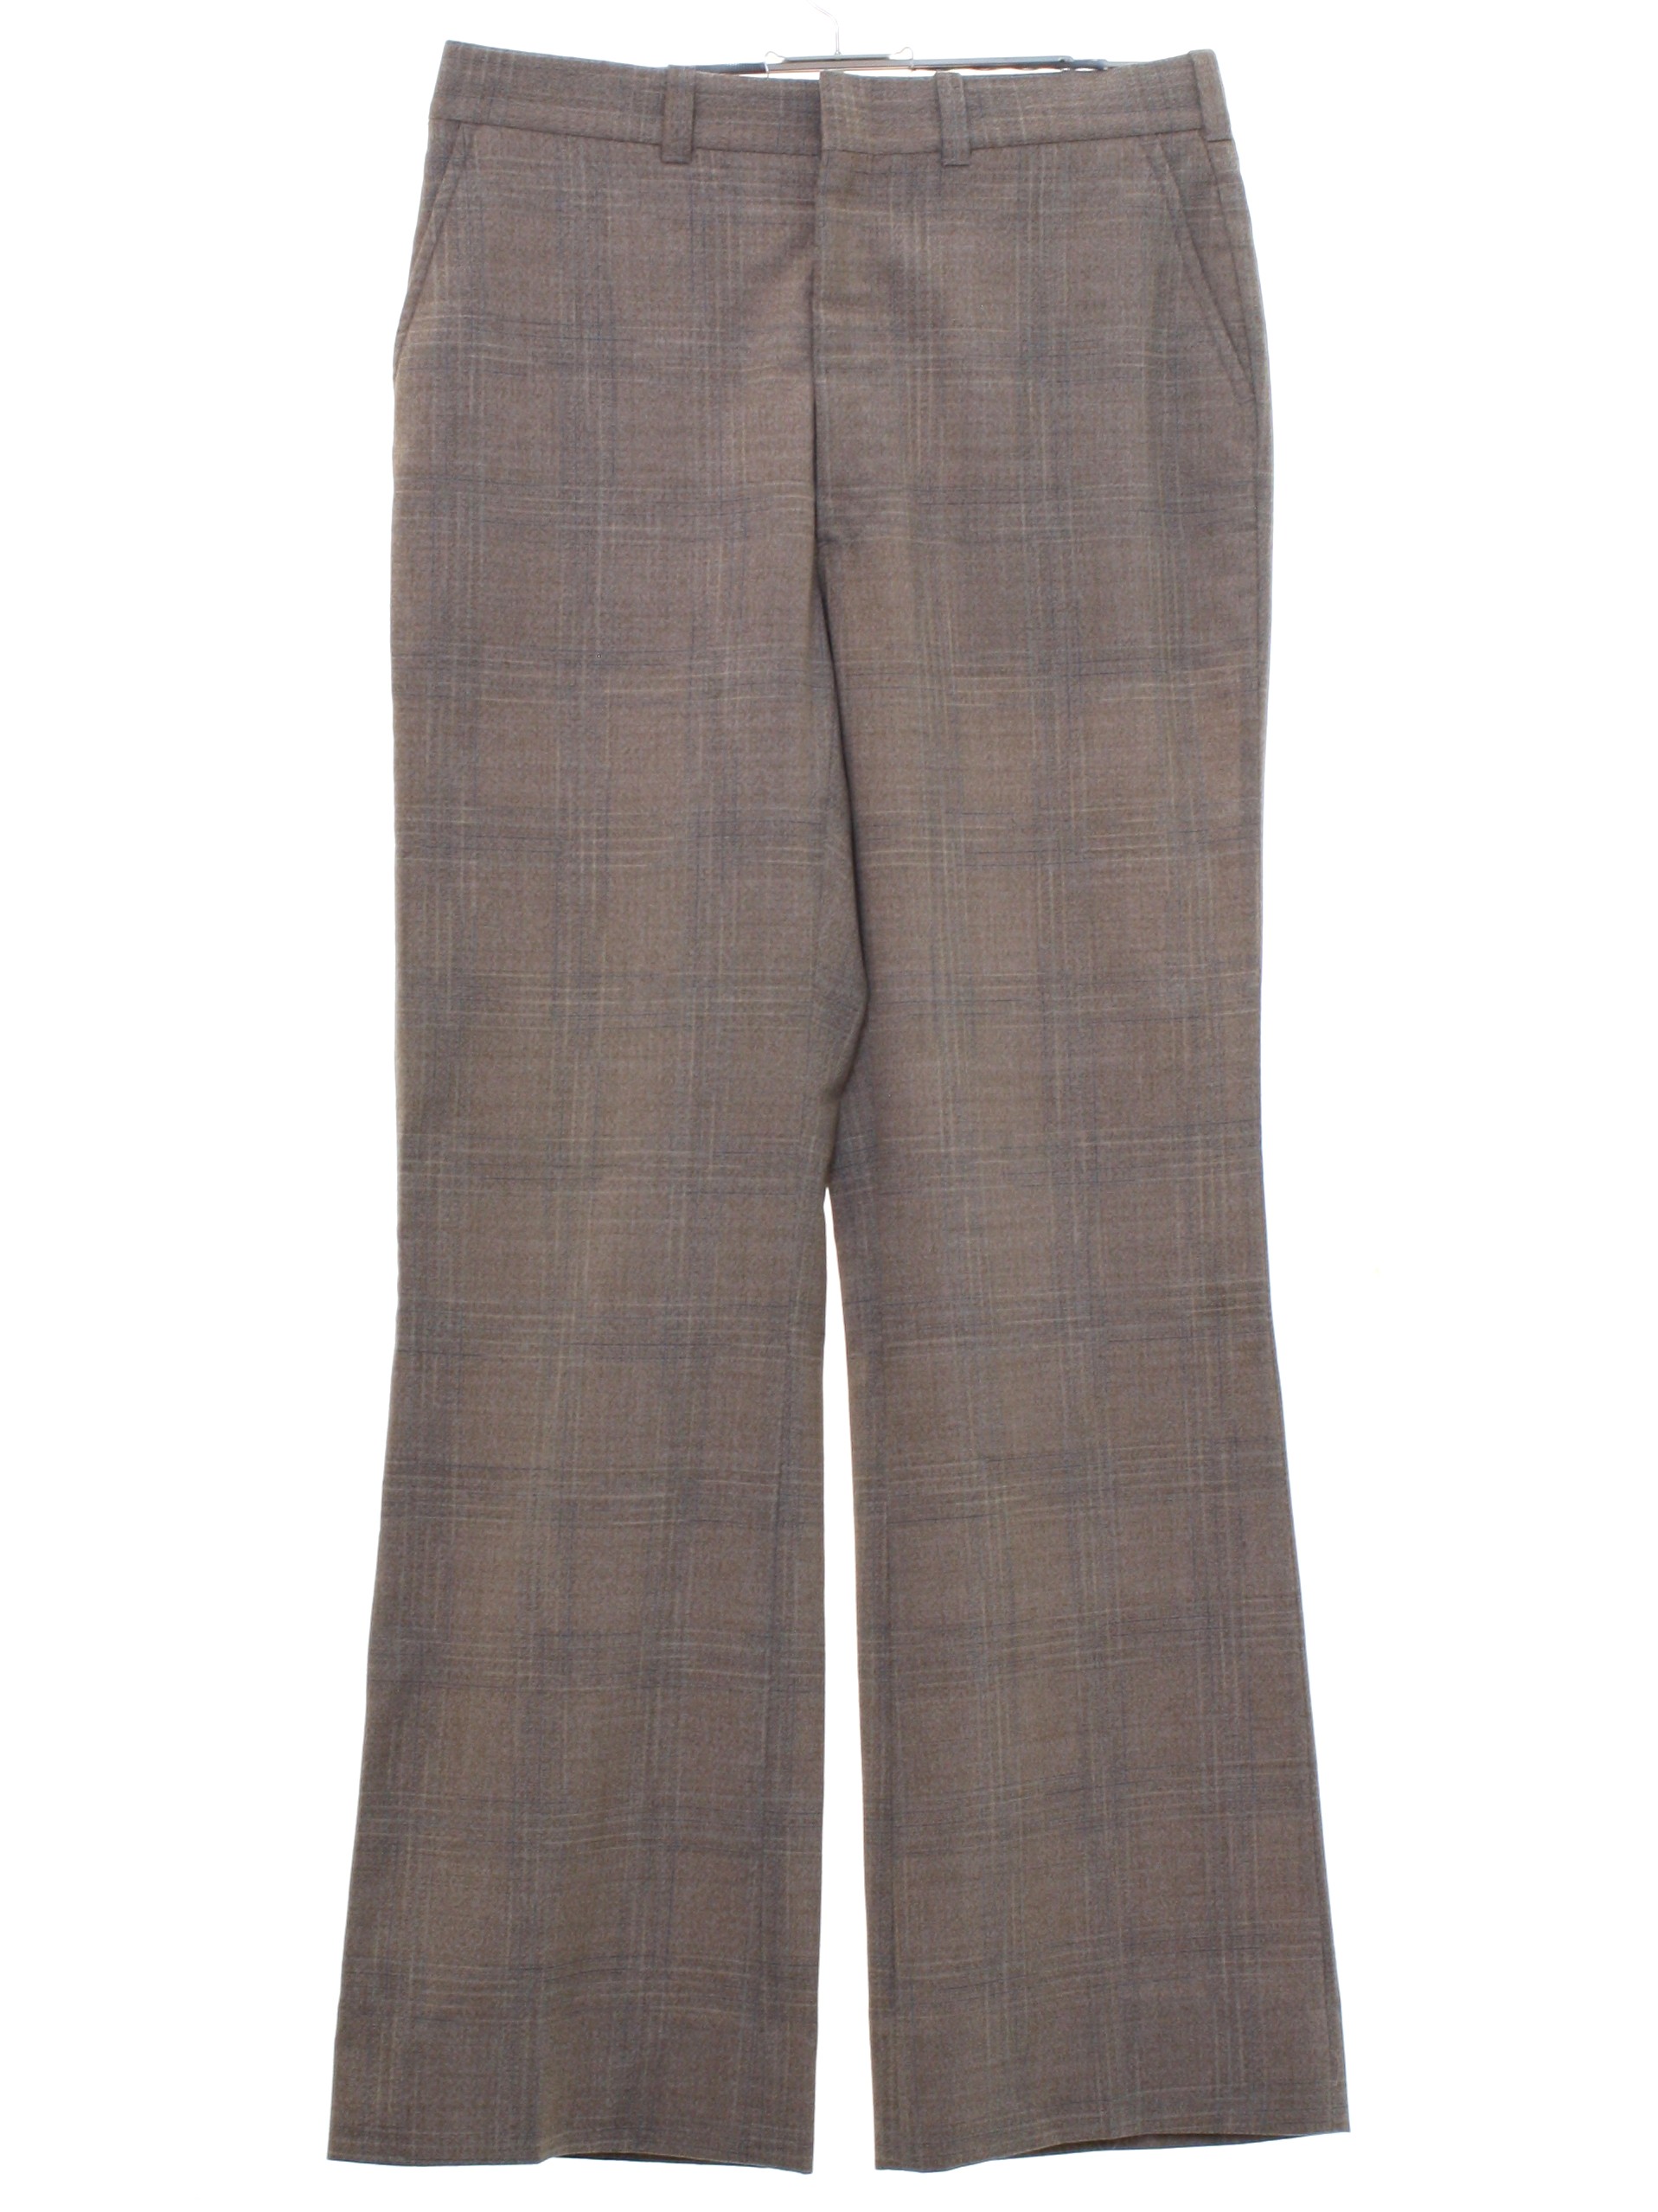 80's Flared Pants / Flares: Early 80s -No Label- Mens taupe and blue ...